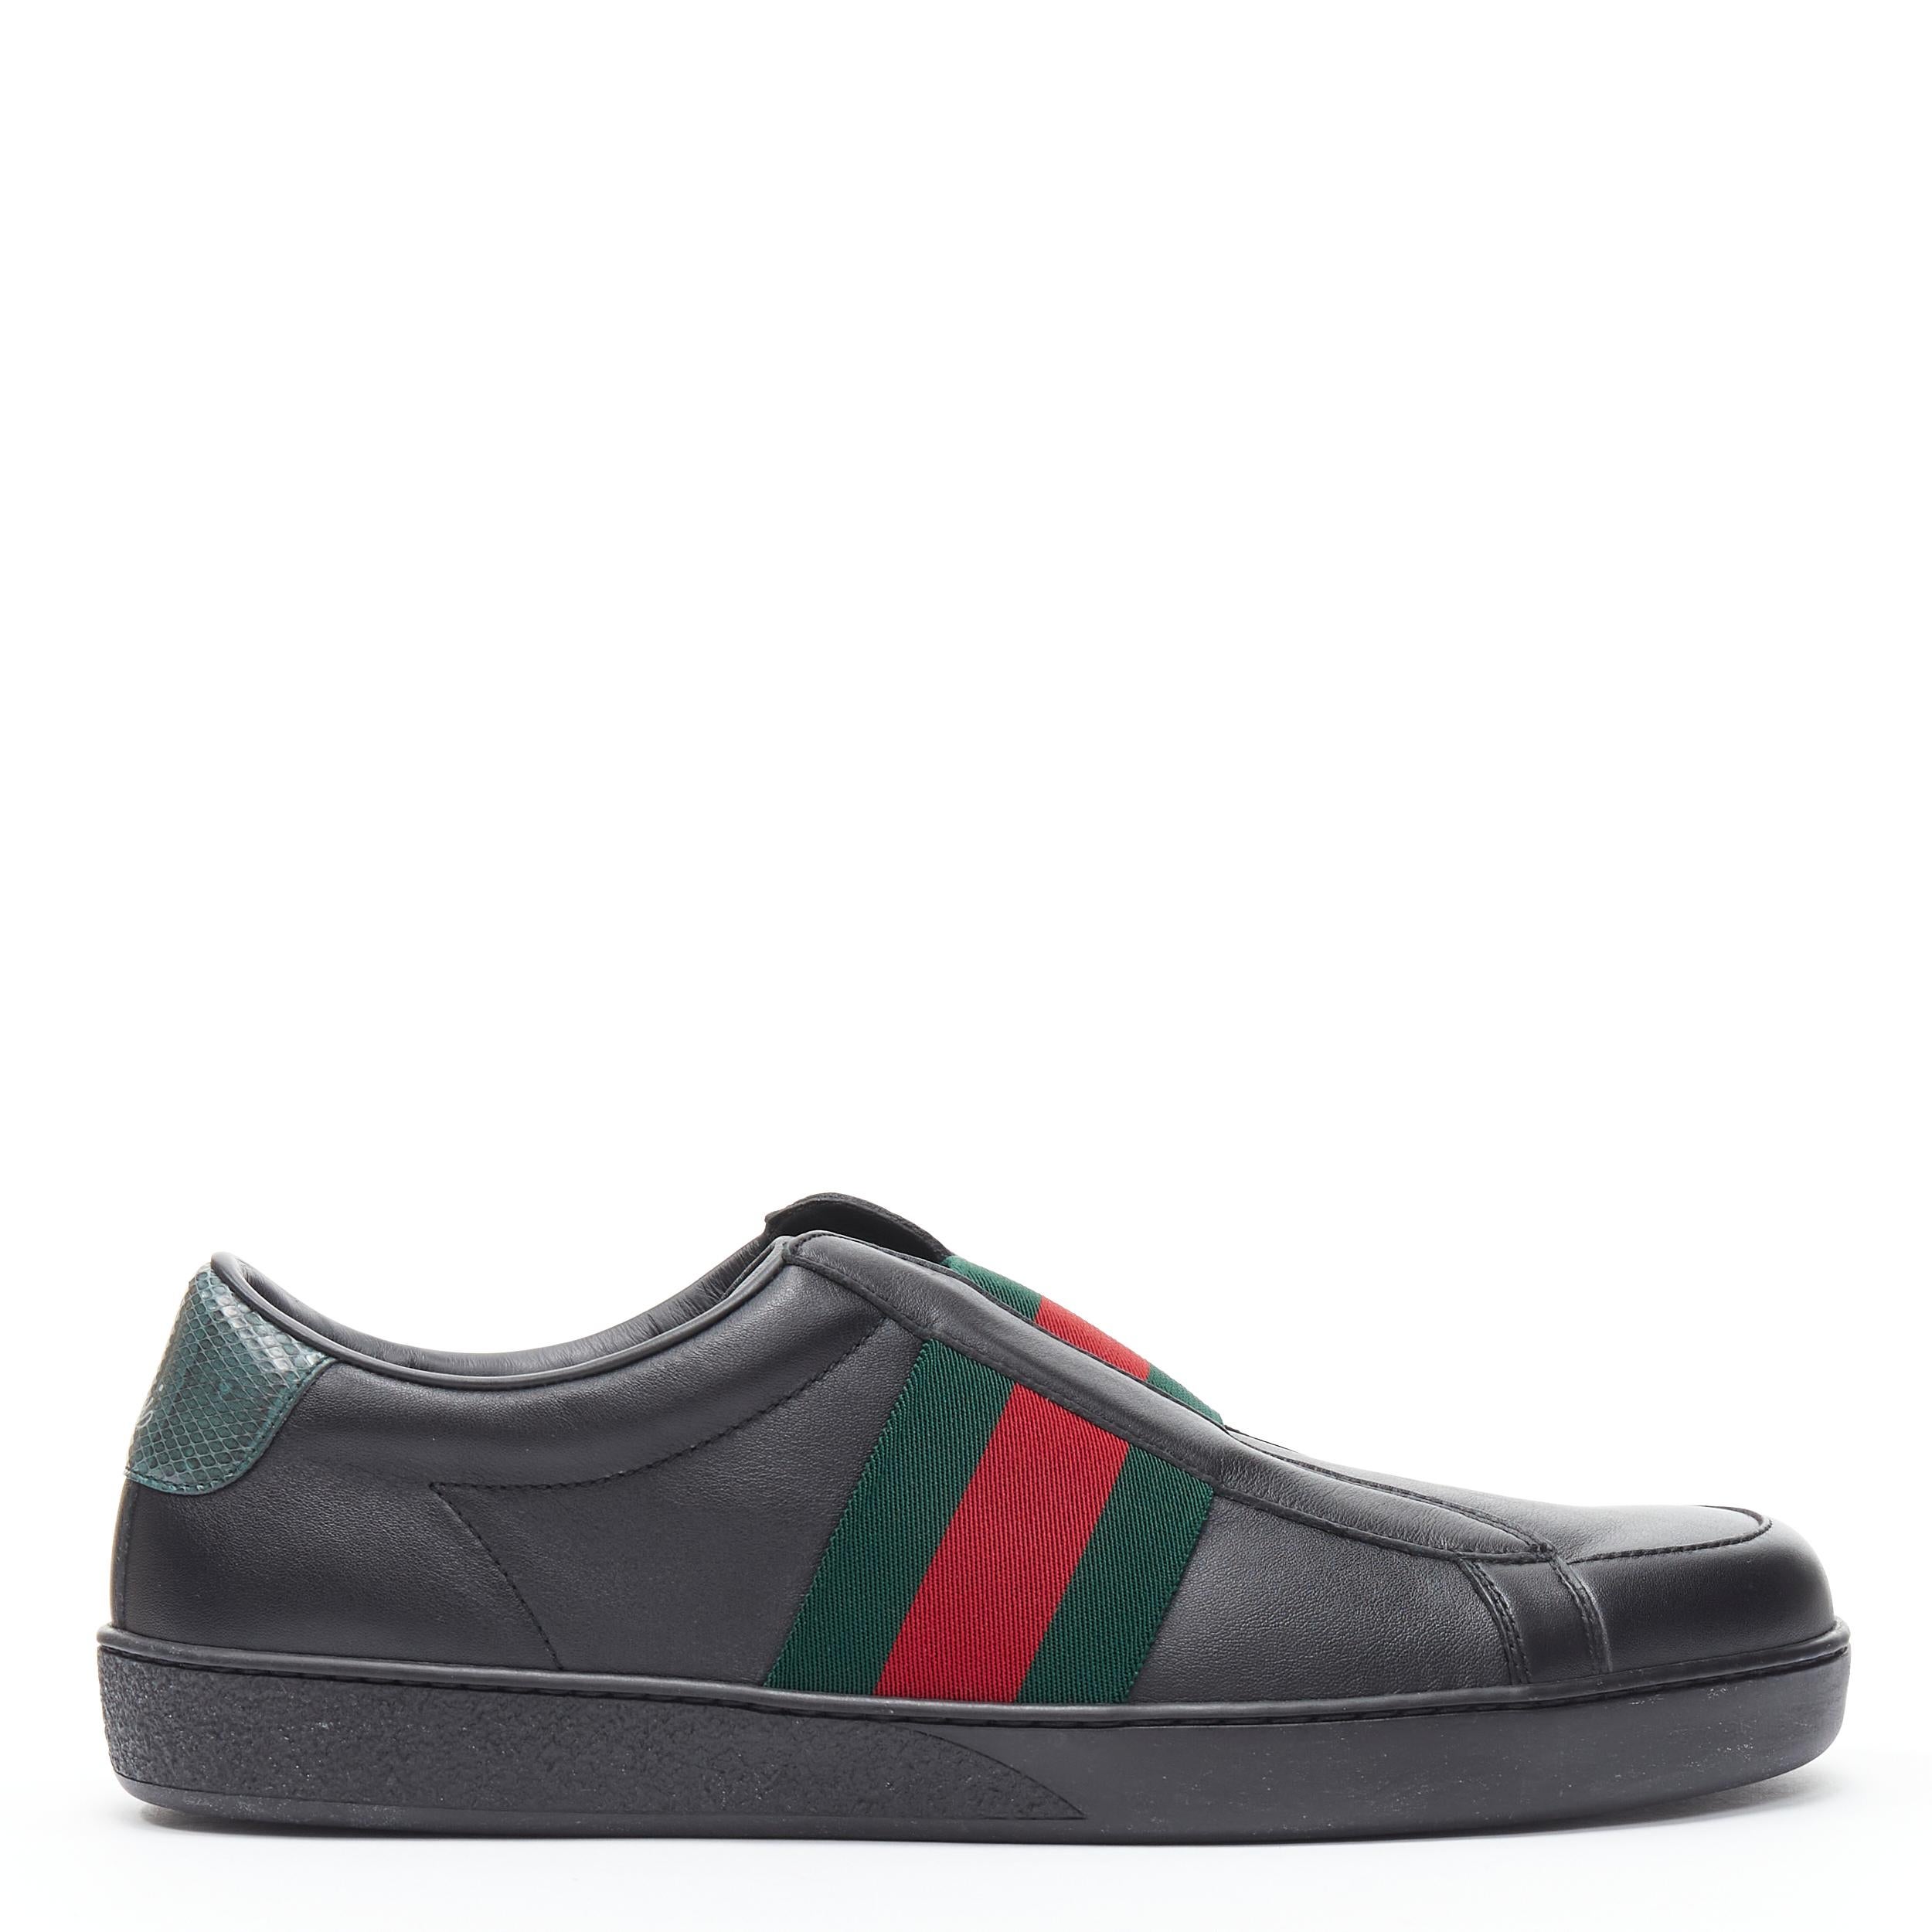 new GUCCI Miro Soft Web Ace black leather pull on low top sneaker UK7.5 EU41.5 
Reference: TGAS/B01266 
Brand: Gucci 
Model: Miro Soft Black Web Ace 
Material: Leather 
Color: Black 
Pattern: Solid 
Extra Detail: Signature web across vamp. Round